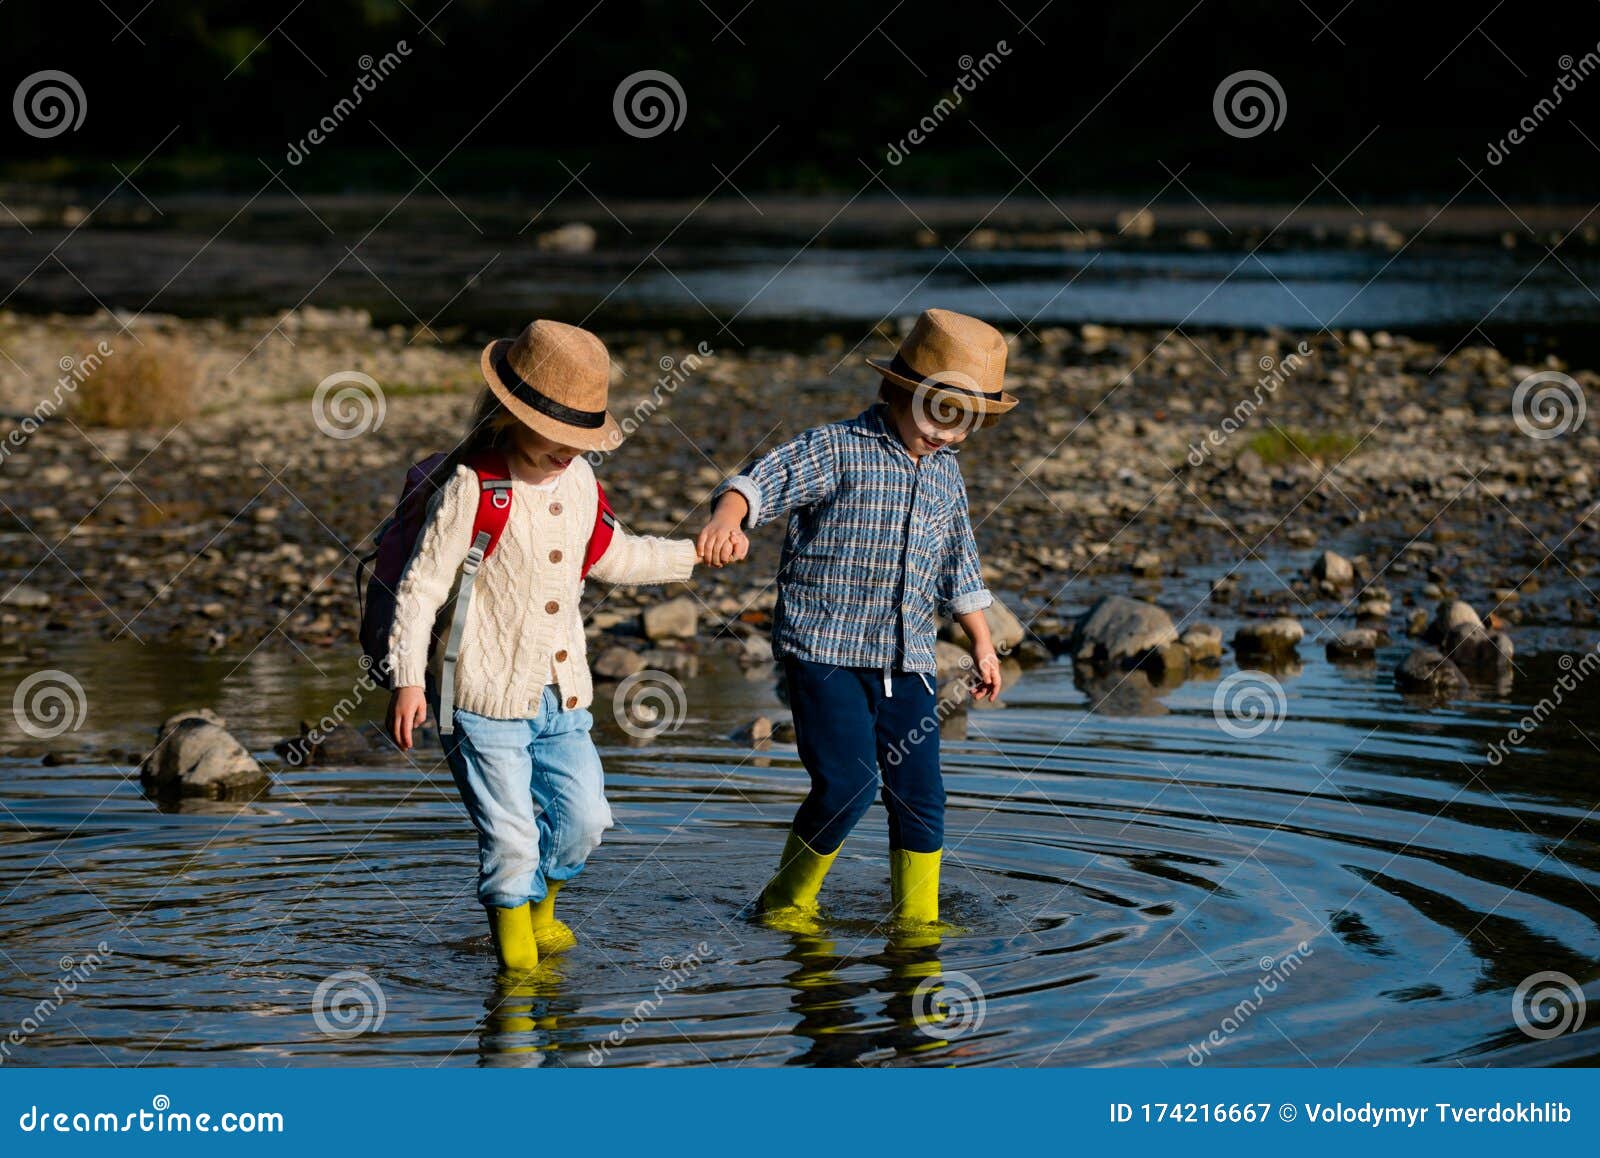 8 Little Boy Girl Best Friends Photos Free Royalty Free Stock Photos From Dreamstime